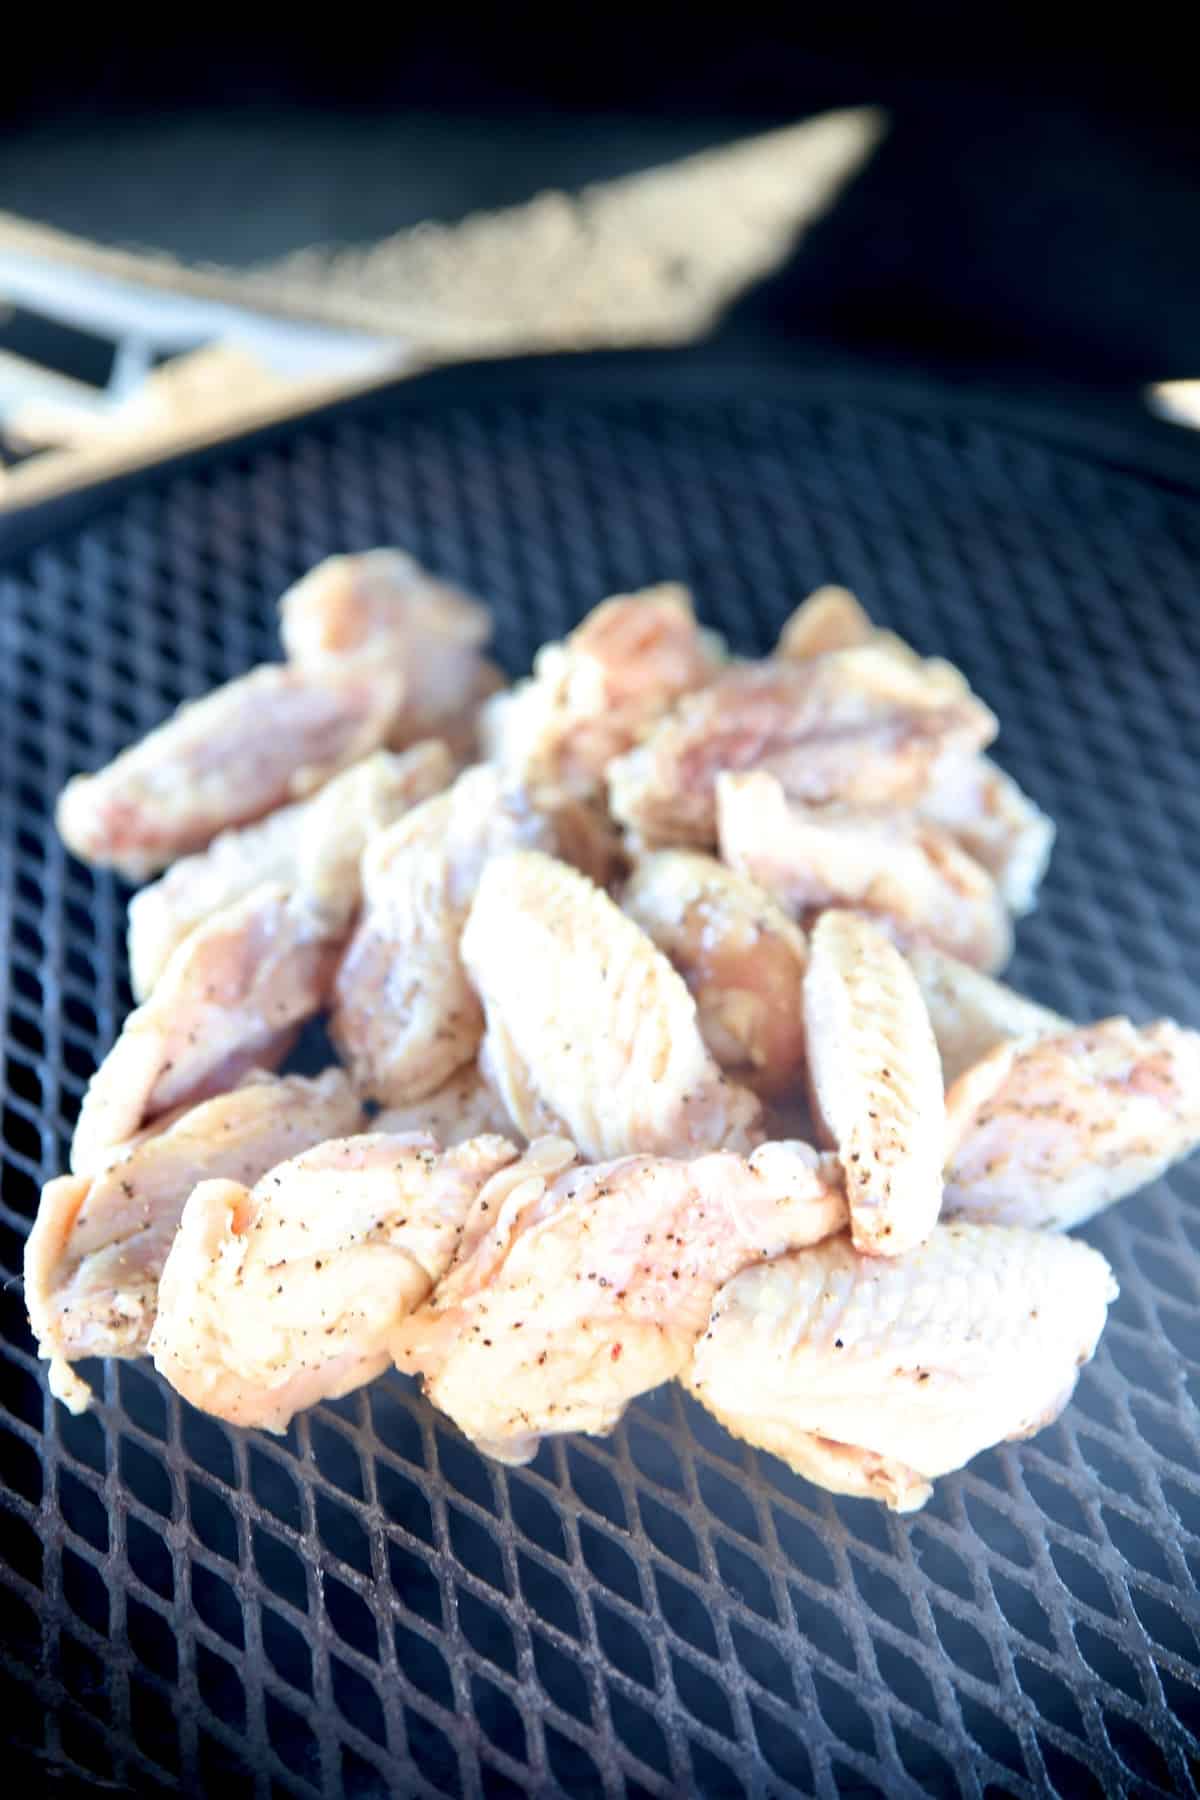 Chicken wings on a grill.